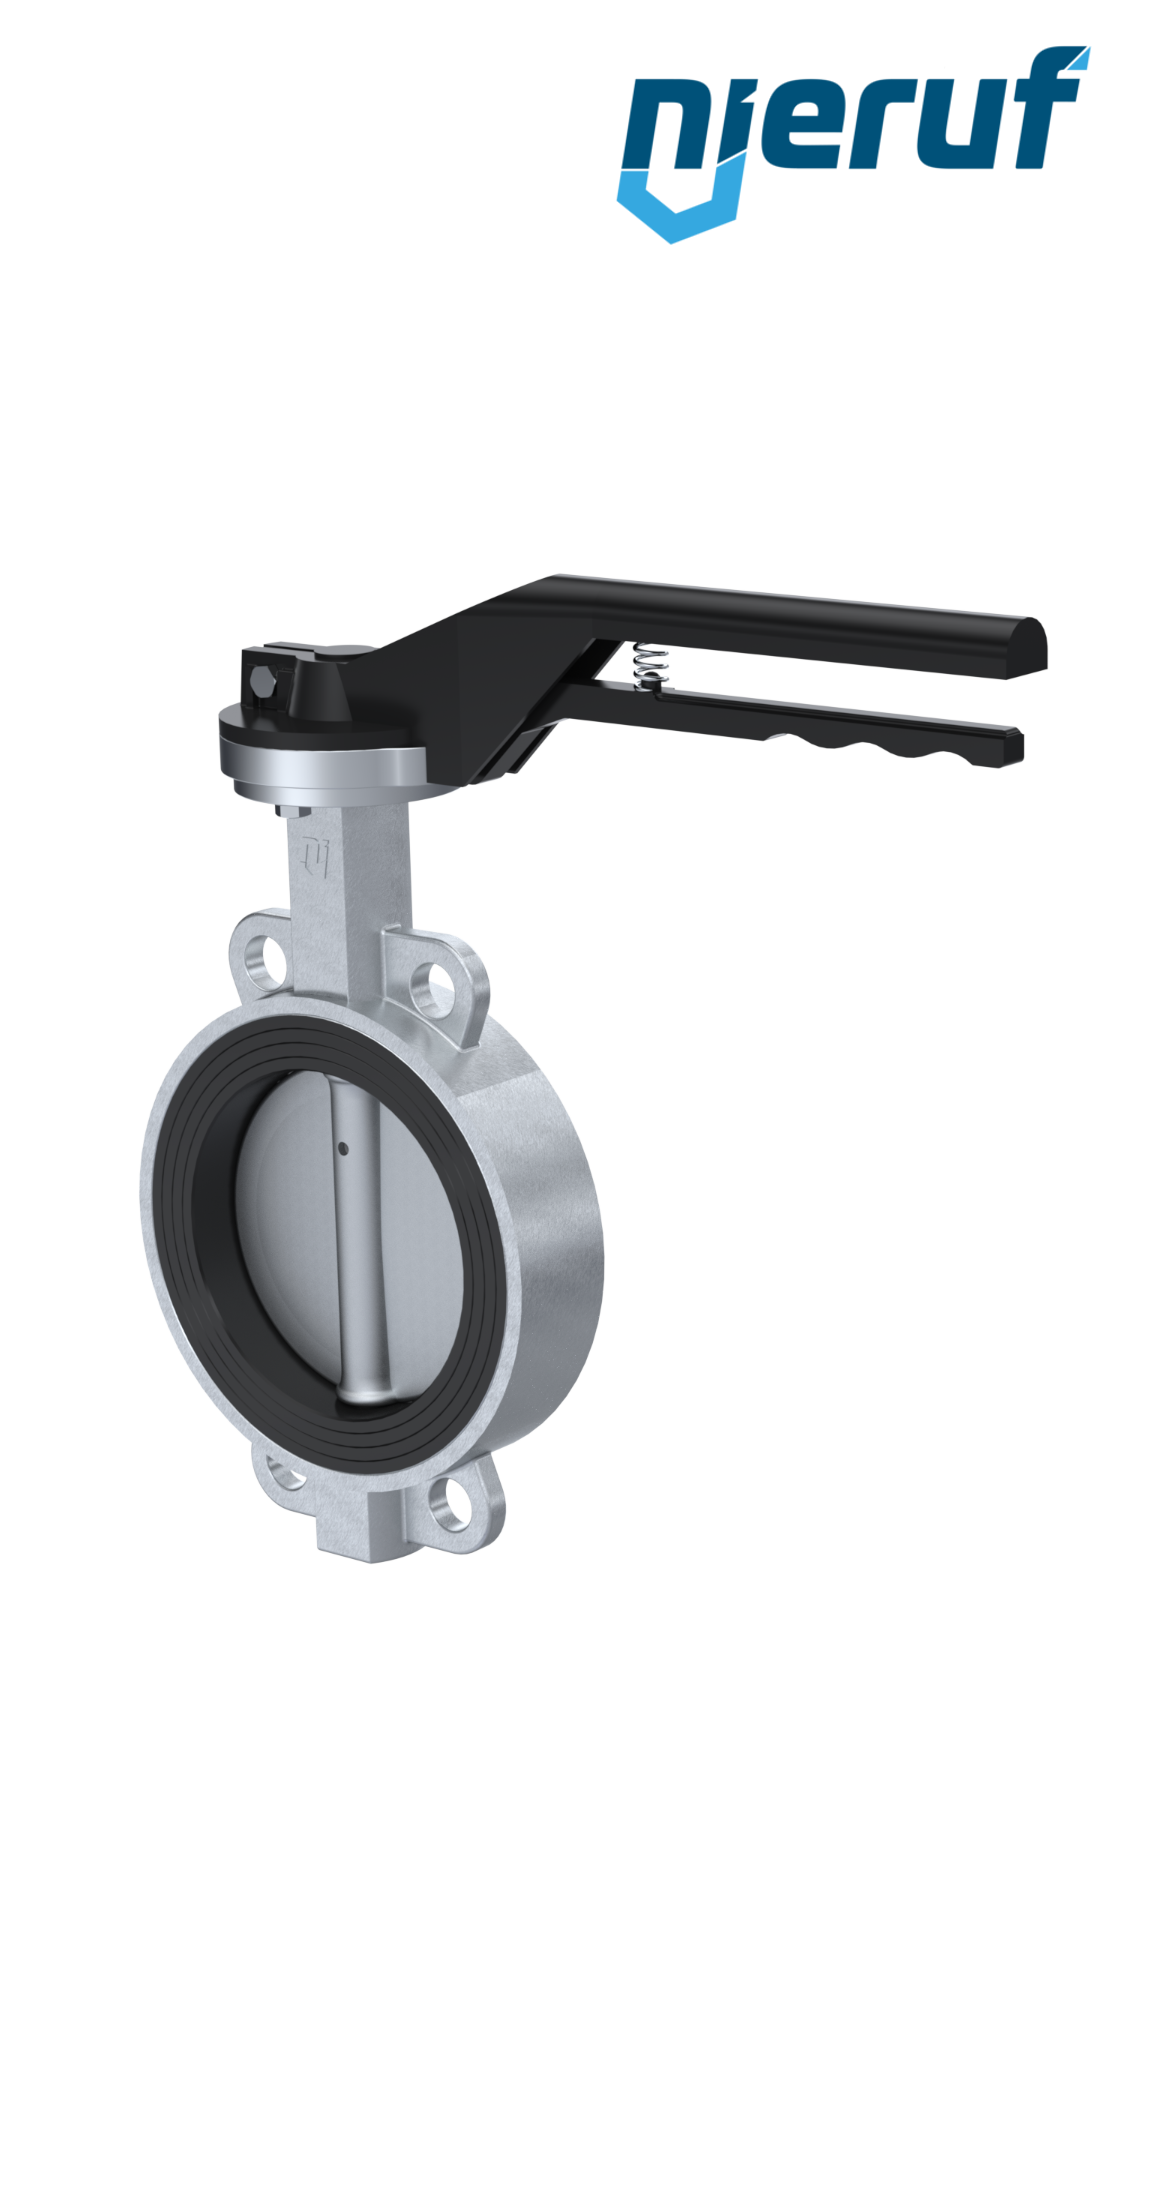 Butterfly-valve-stainless-steel DN 125 PN16 AK08 EPDM notch lever